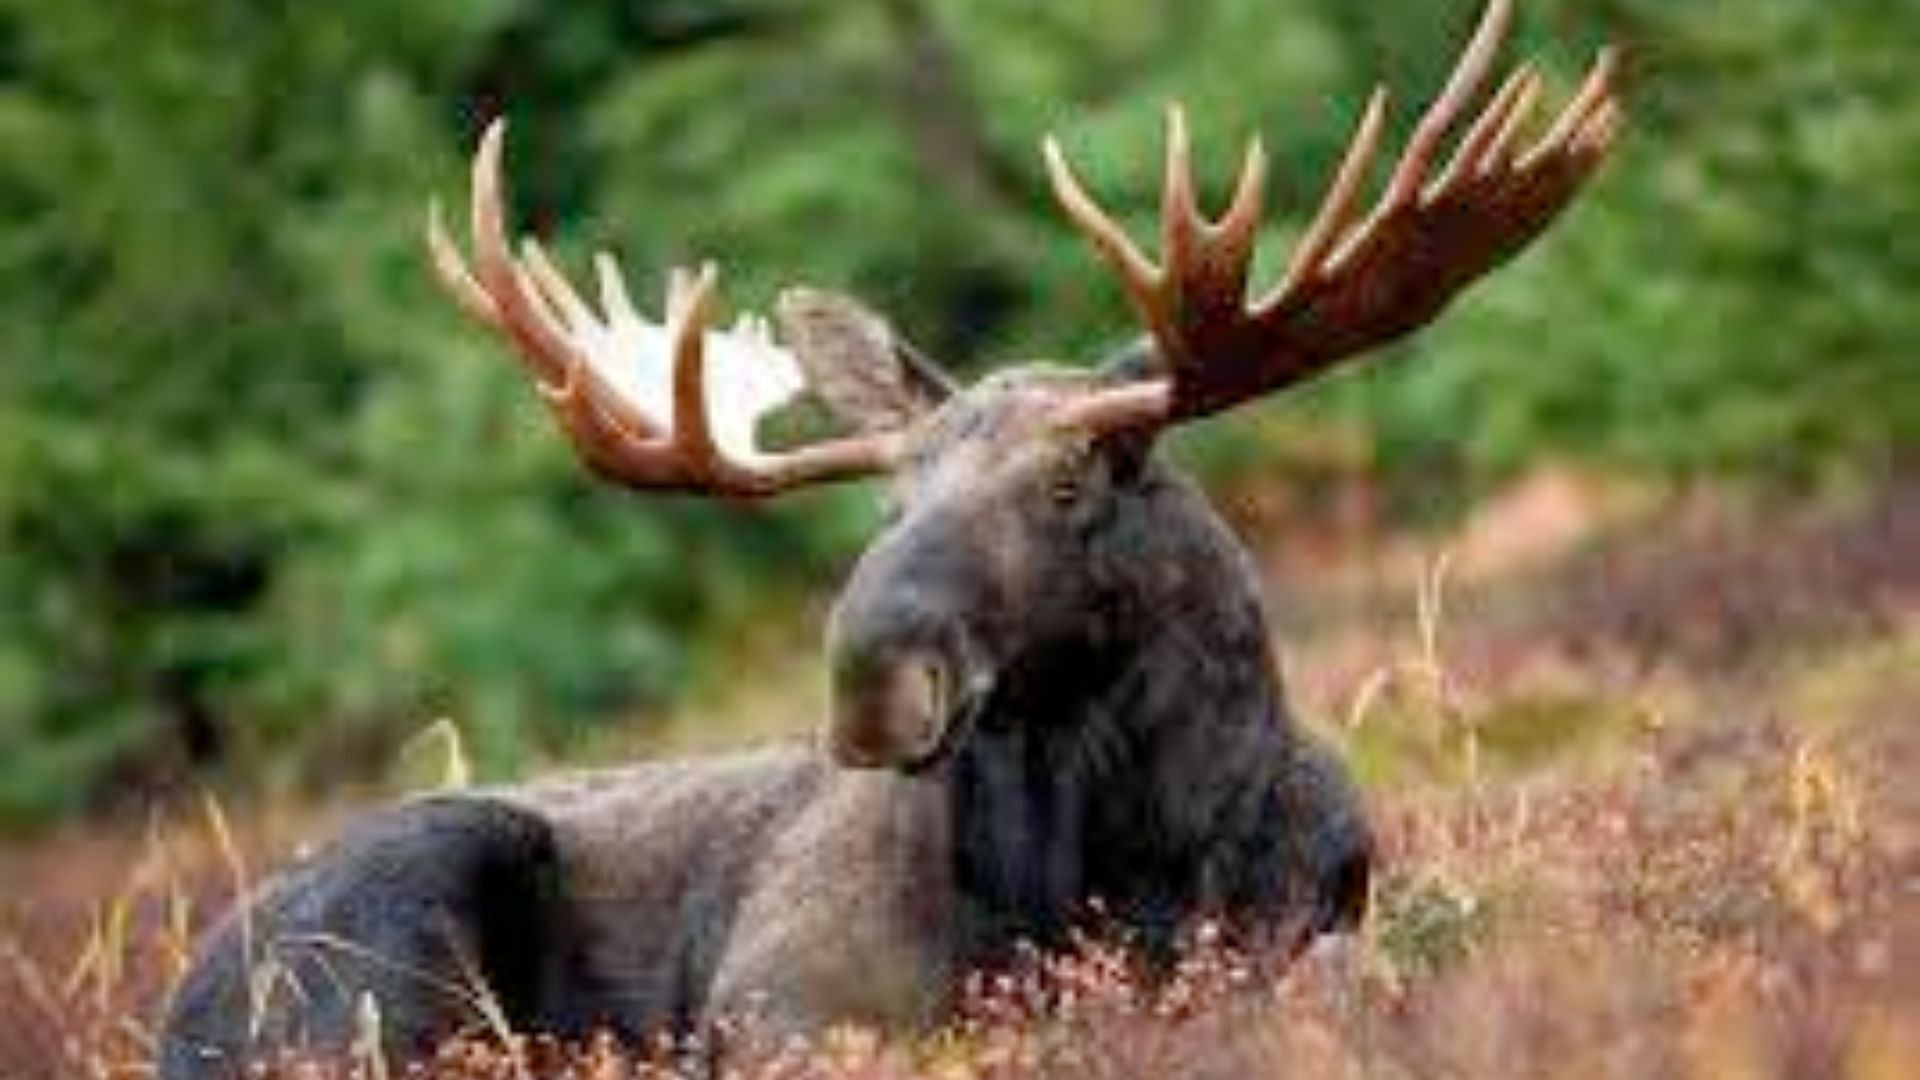 A Bull moose as seen in its natural habitat during peak breeding season (Image via Getty for National Geography)